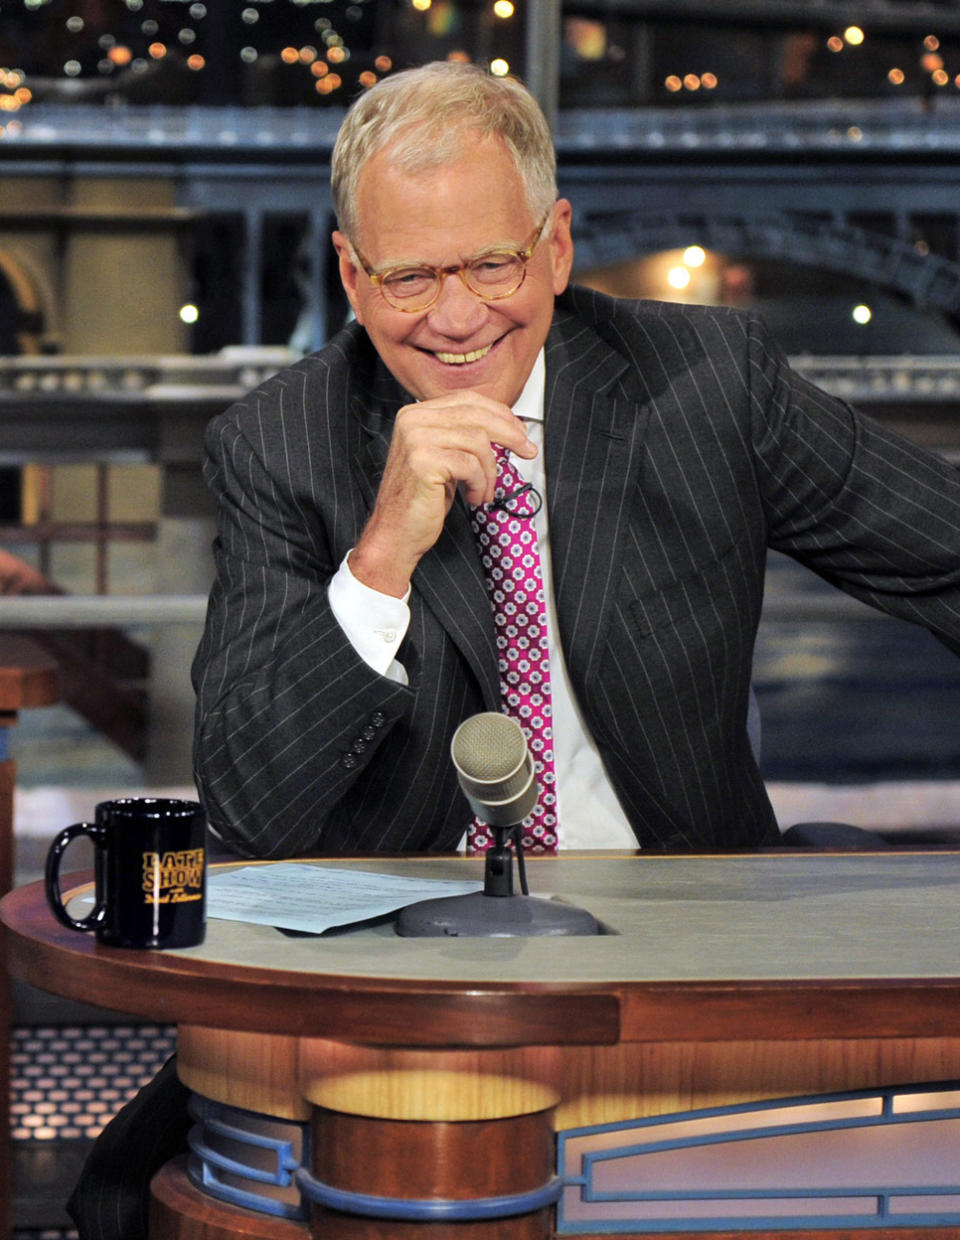 FILE - In this April 23, 2012 file photo provided by CBS, host David Letterman appears during a taping of his show “Late Show with David Letterman, in New York. Letterman says he plans to retire next year as host of “Late Show.” During a taping of his show Thursday, April 3, 2014, Letterman said he has informed his CBS bosses that he will step down in 2015, when his current contract expires. He told his audience he expects his departure will be “at least a year or so” from now. (AP Photo/CBS, John Paul Filo) MANDATORY CREDIT; NO ARCHIVE; NO SALES; NORTH AMERICAN USE ONLY